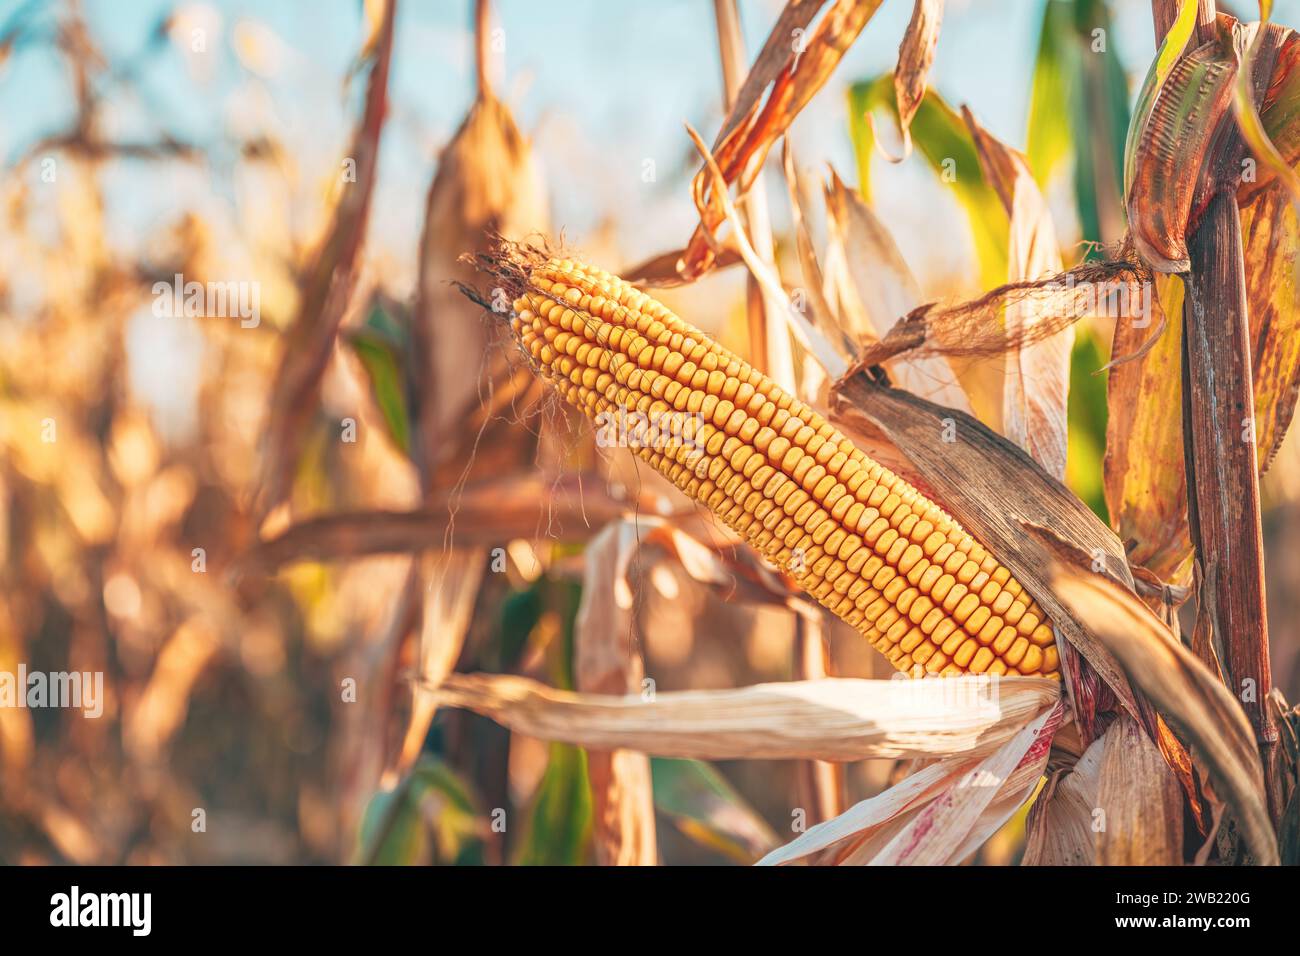 Maize crop is ready for harvest, yellow corn on the con in plantation field, selective focus Stock Photo